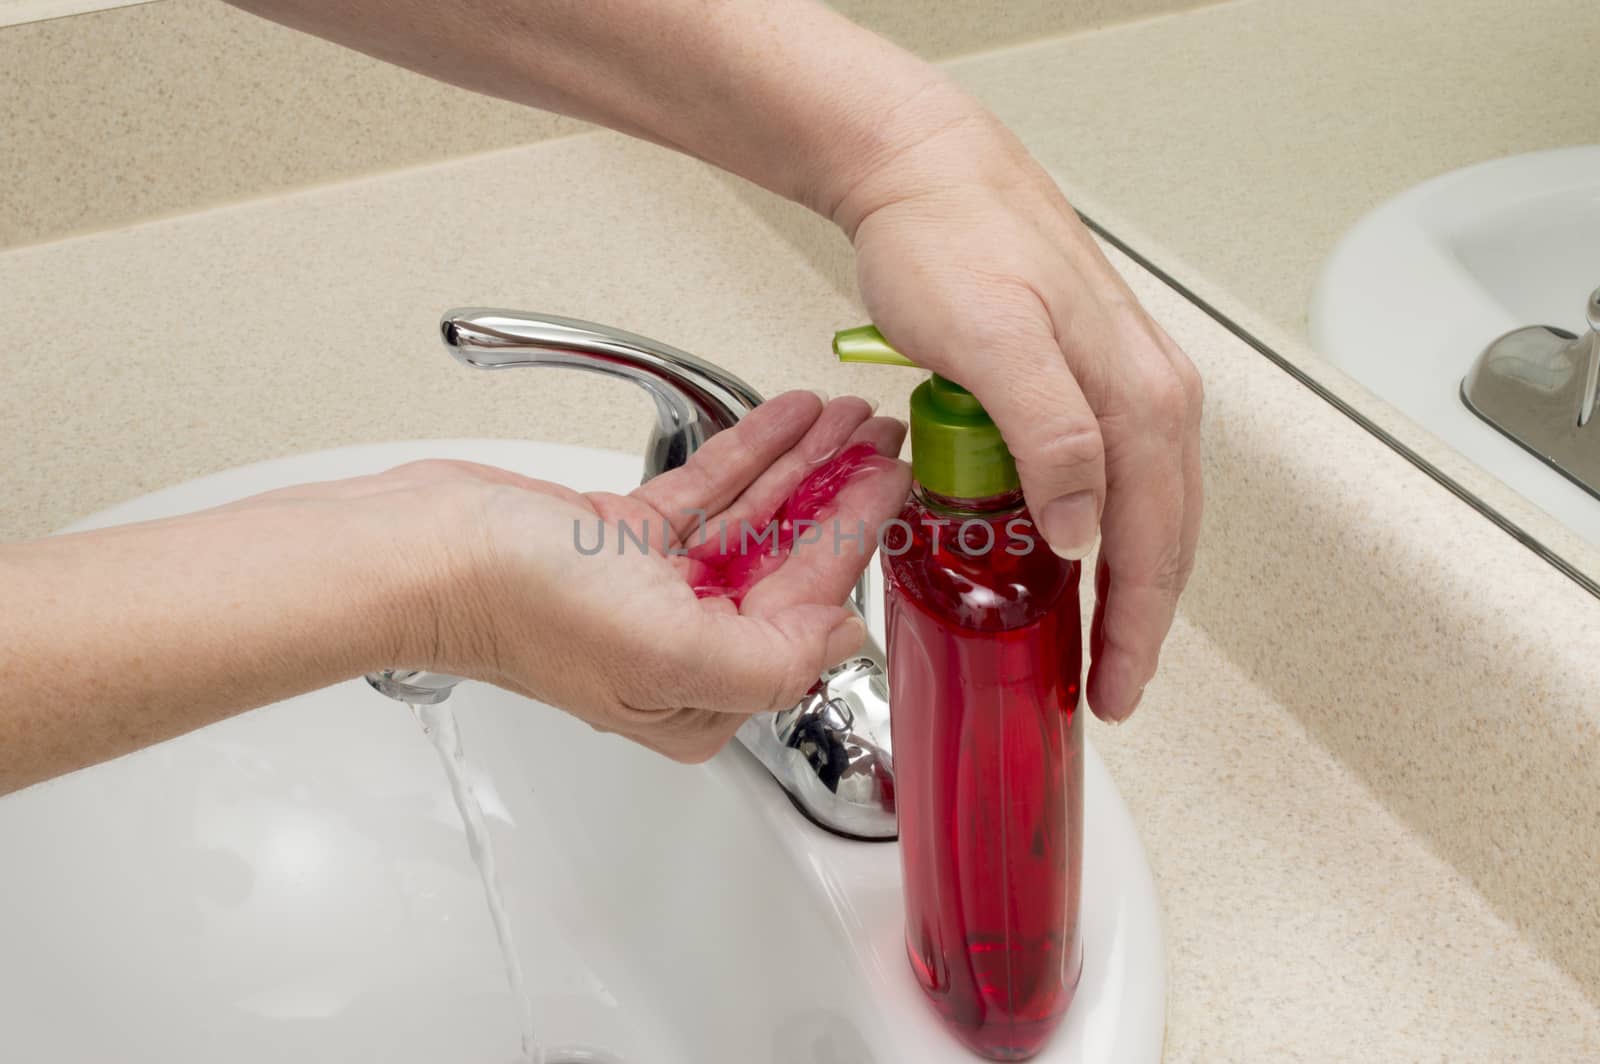 Female hand pressing liquid soap into hand to clean hands.